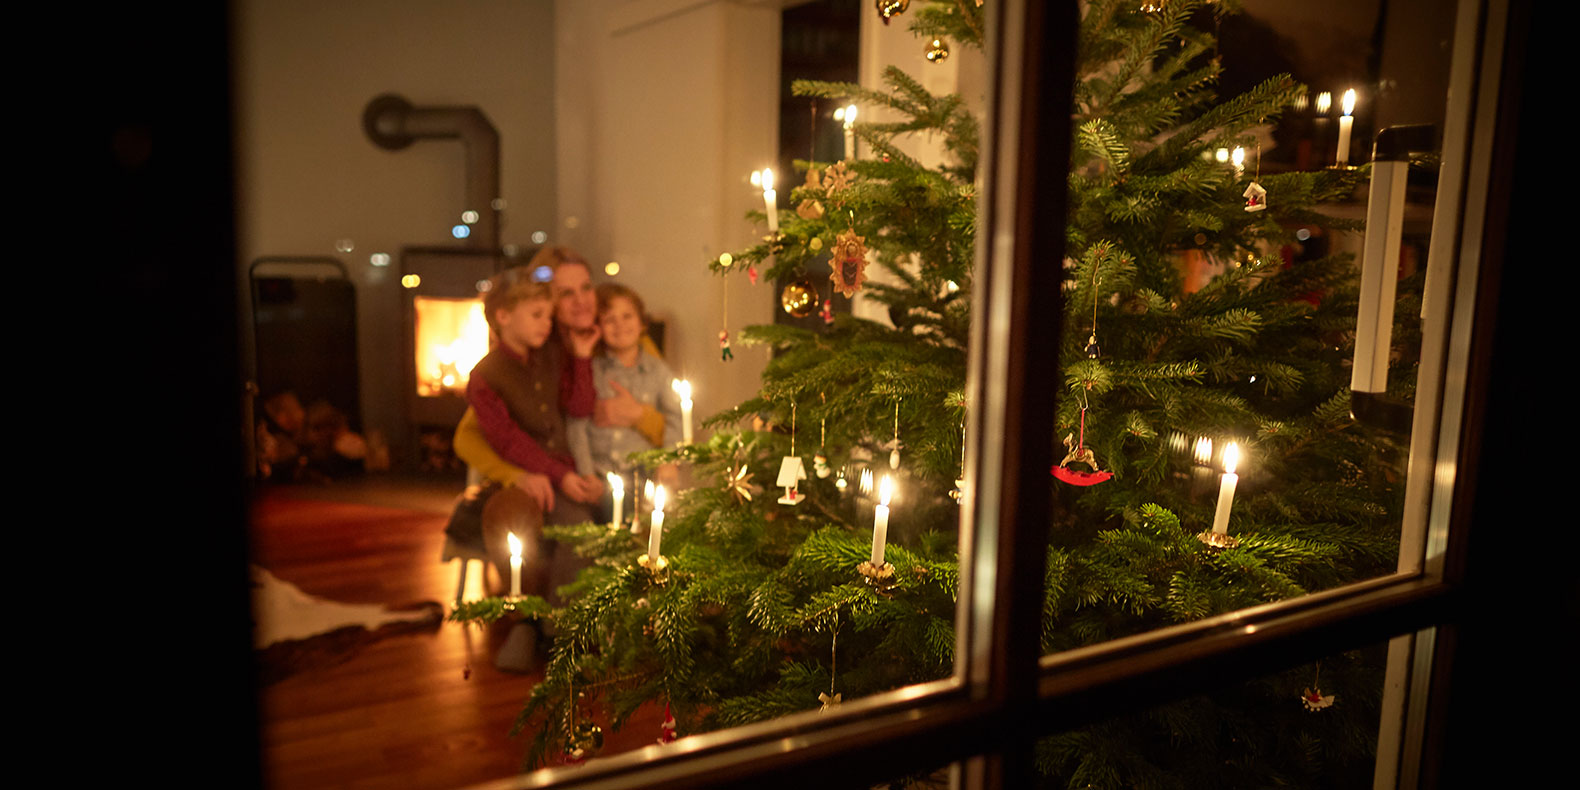 Alleviate Holiday Stress with Smart Home Security